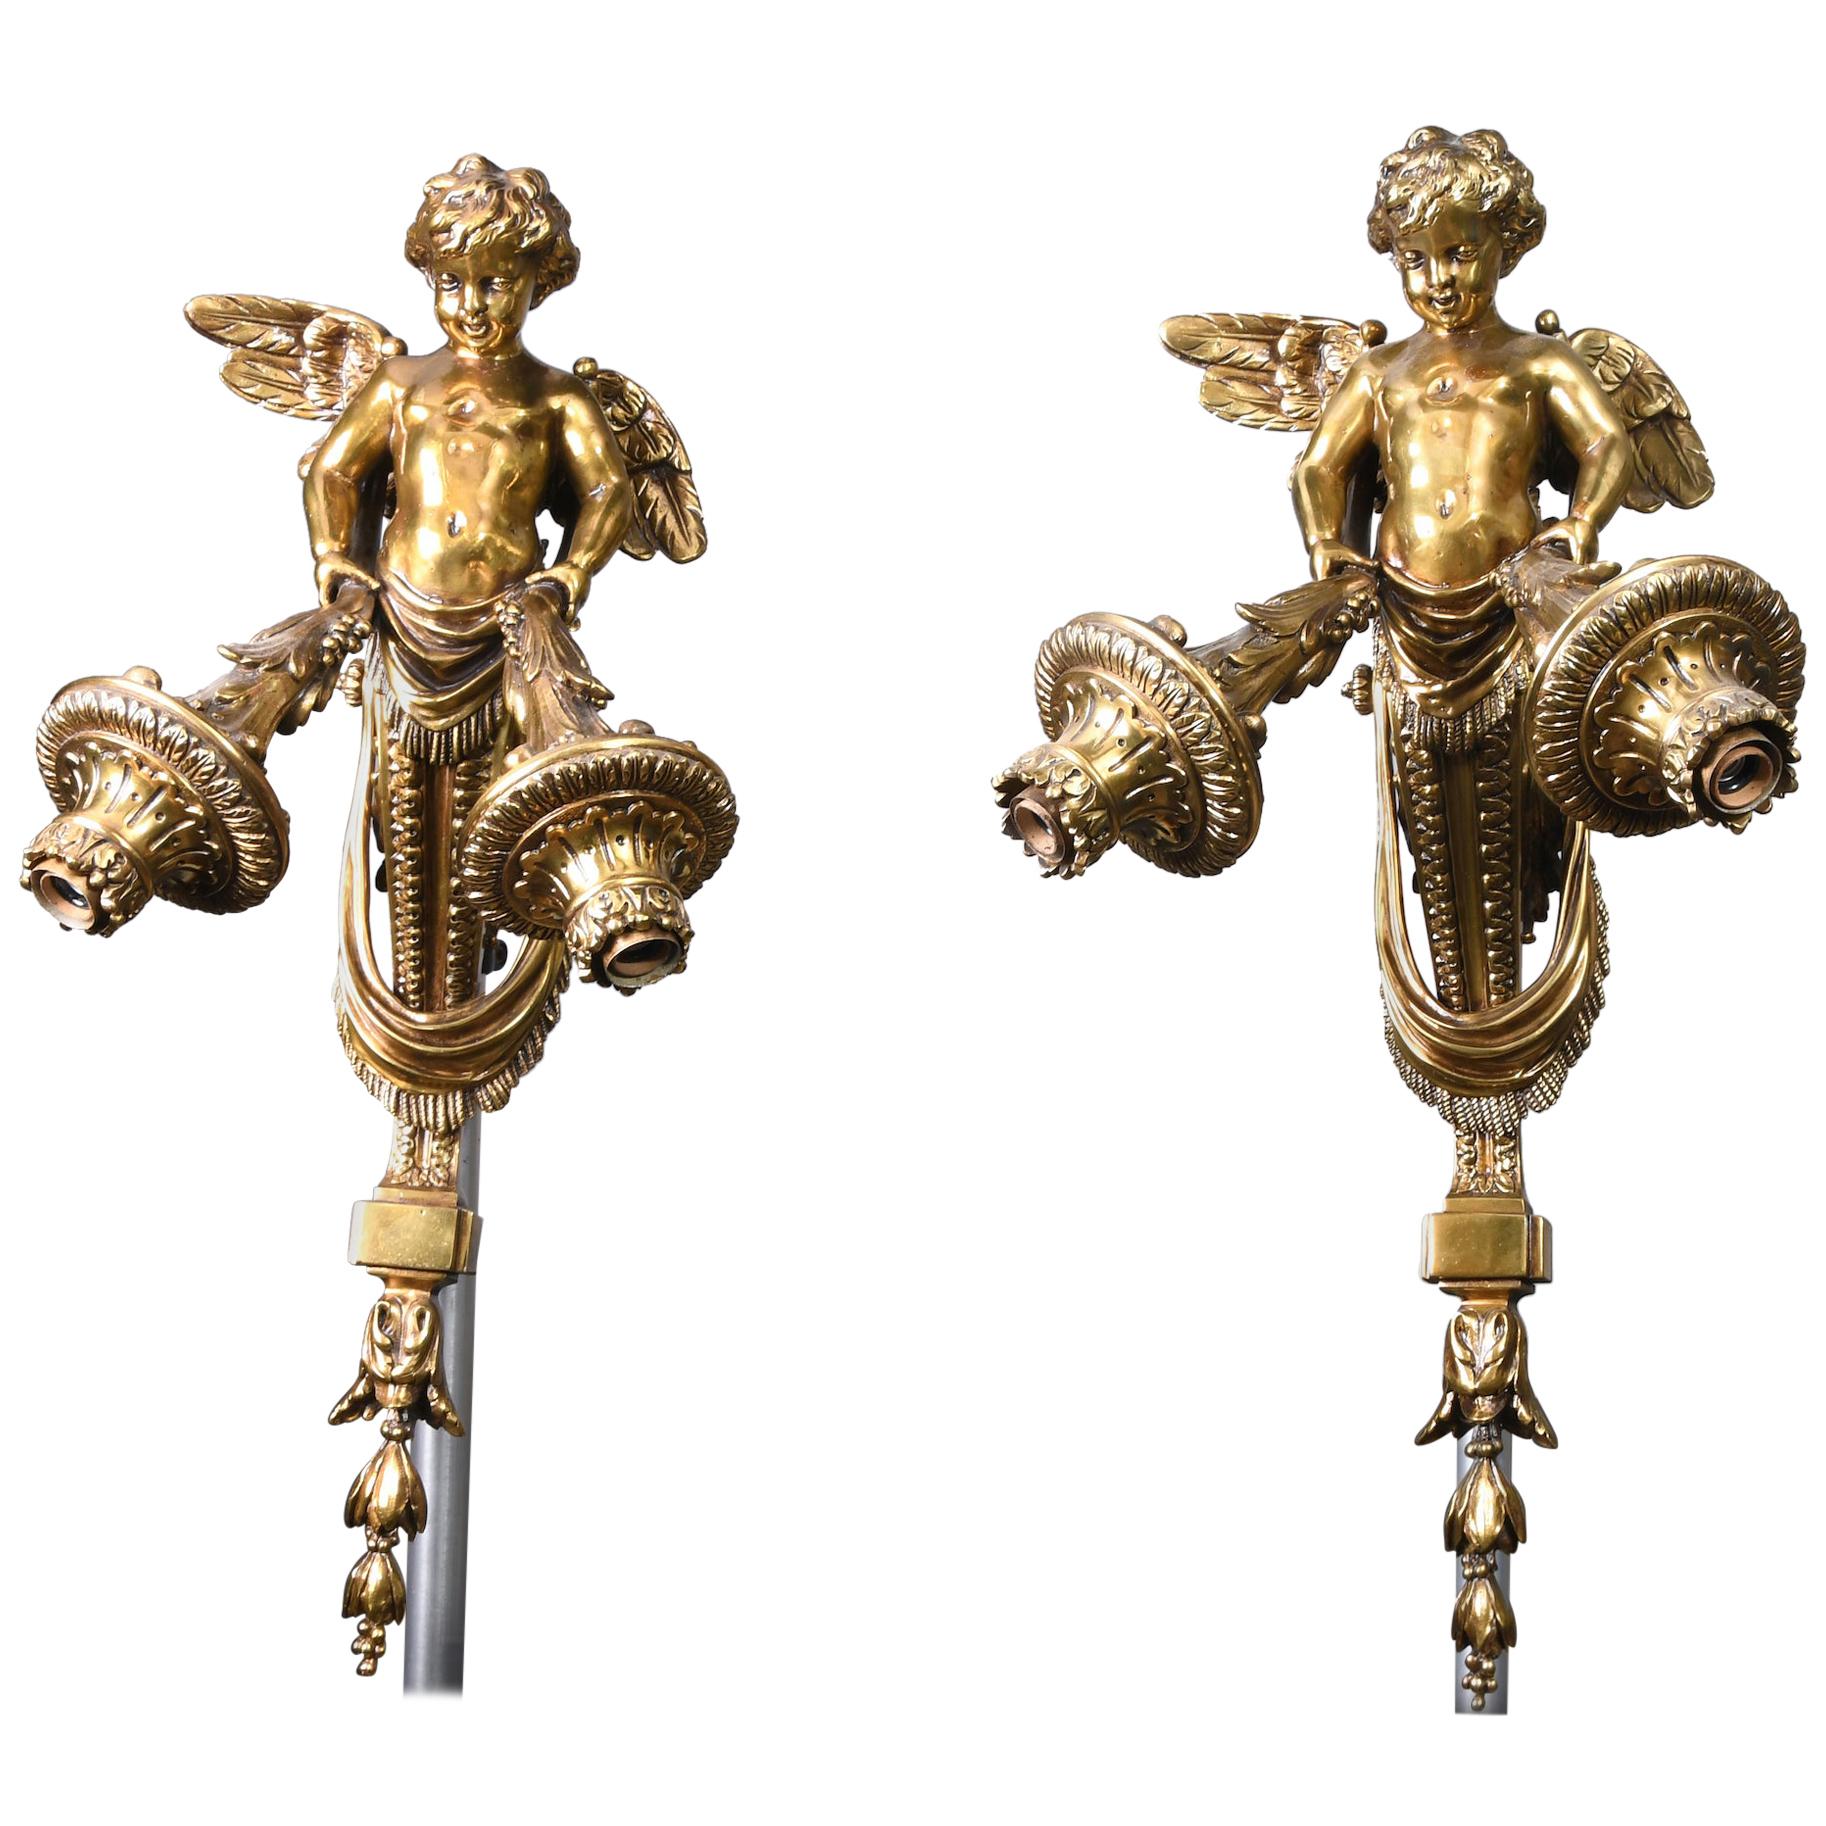 Early 19th Century Pair of Bronze Empire Revival Cherub Wall Sconces/Torcherier For Sale